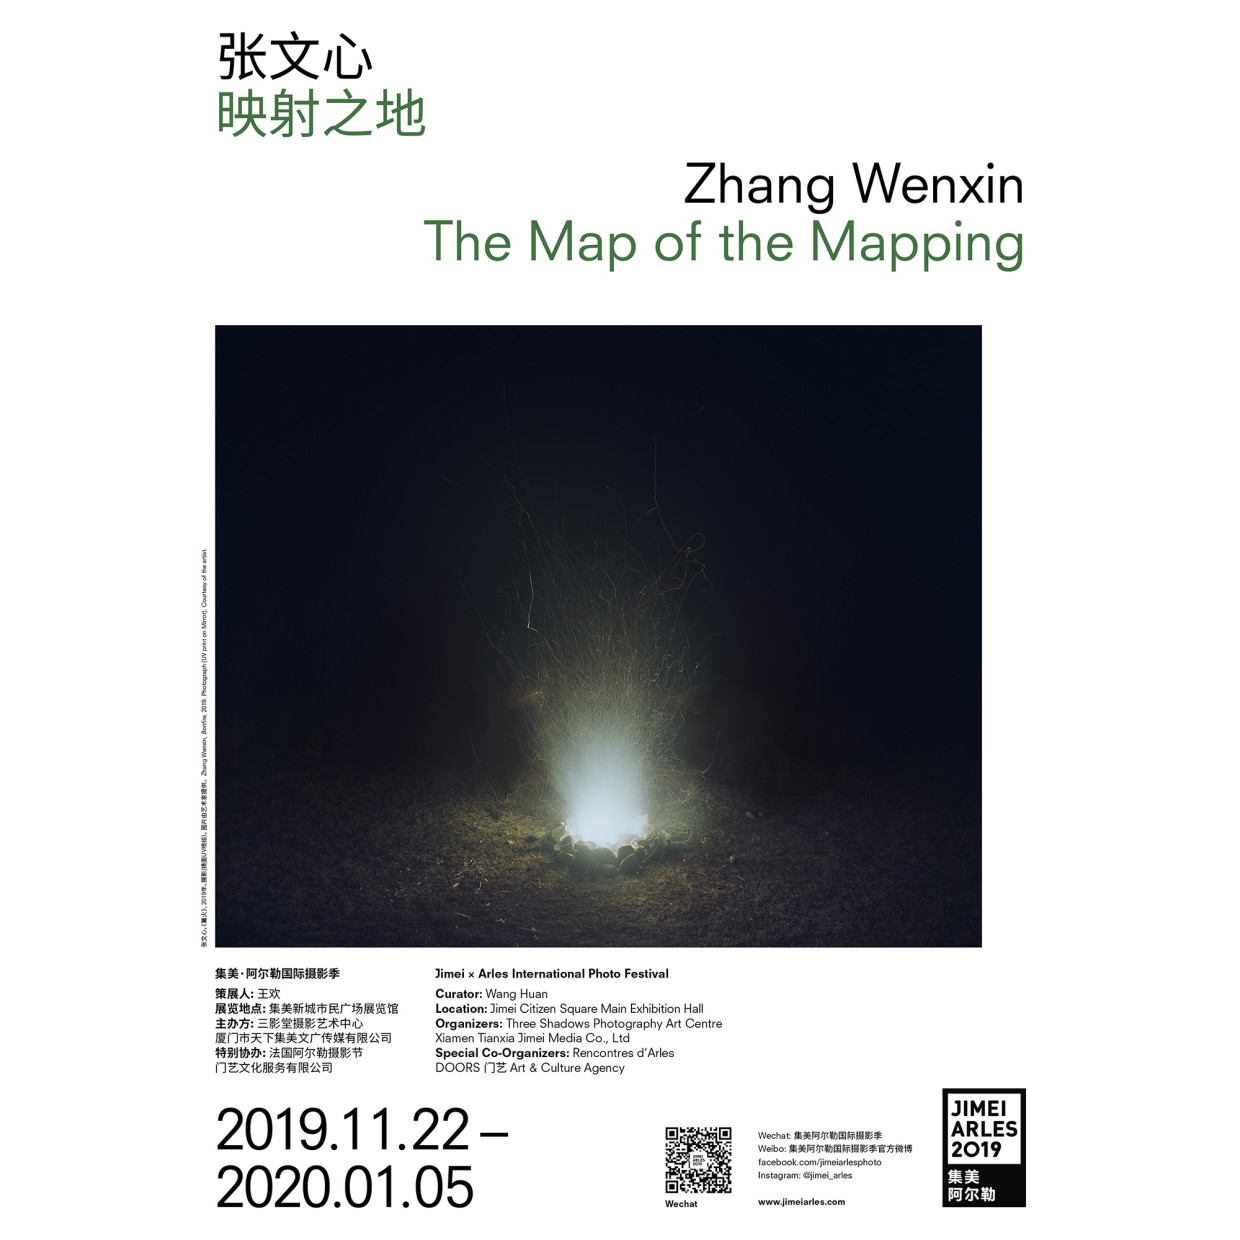 ZHANG WENXIN THE MAP OF THE MAPPING CURATED BY WANG HUAN In “The Map of the Mapping,” Zhang Wenxin selected...